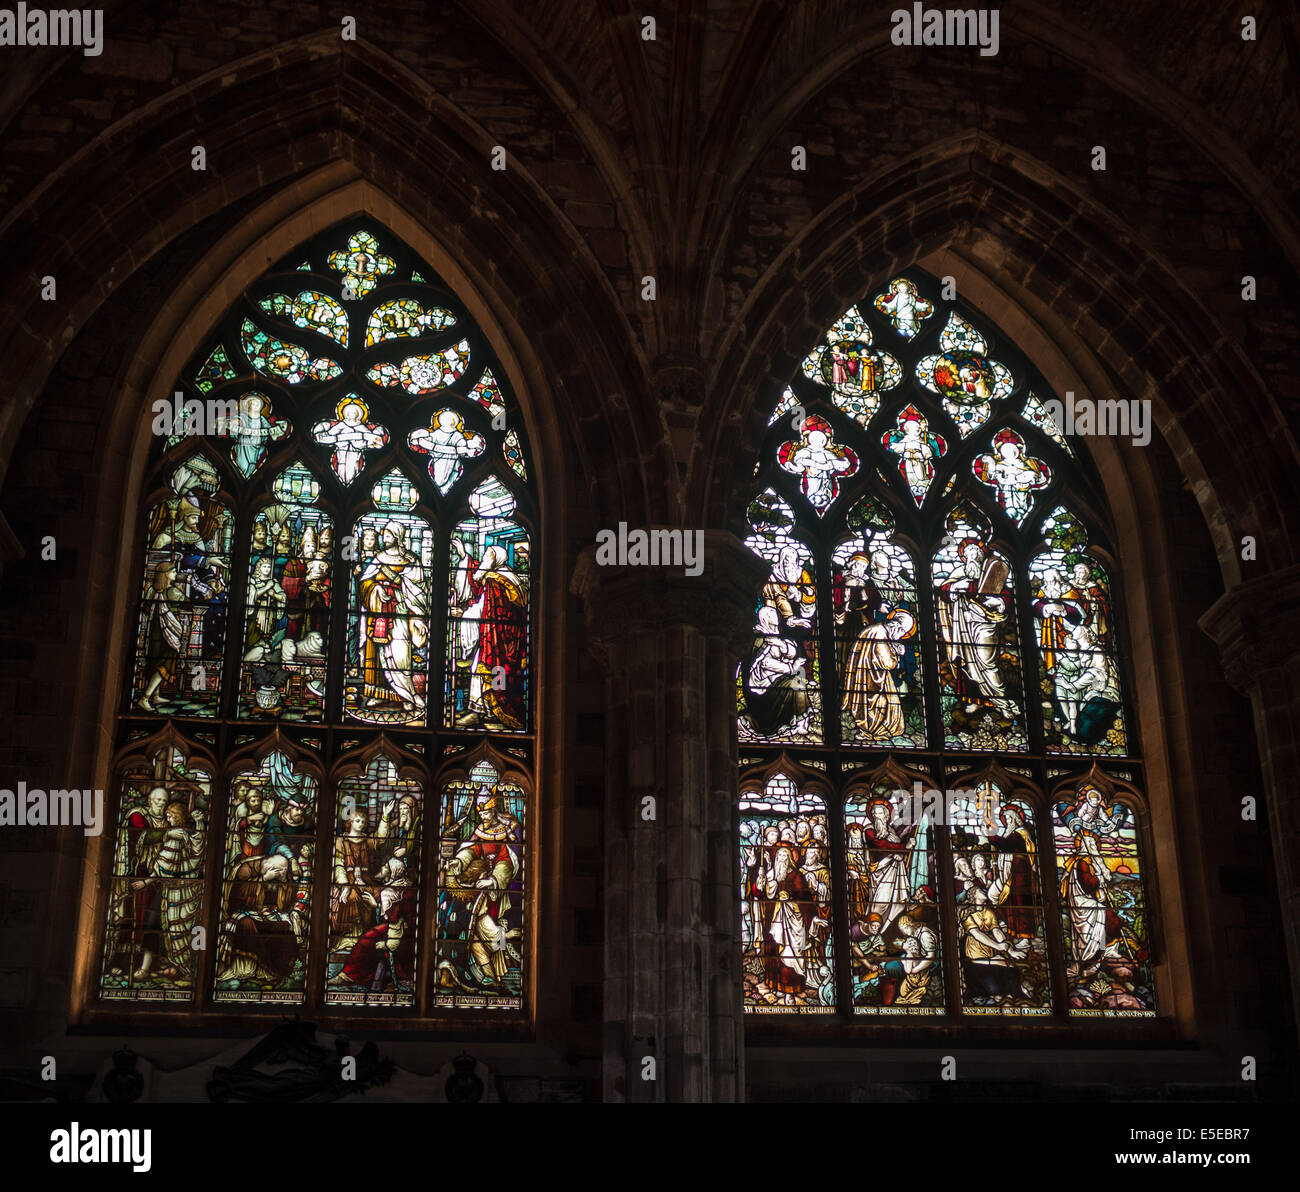 St Giles Cathedral stained glass window Stock Photo